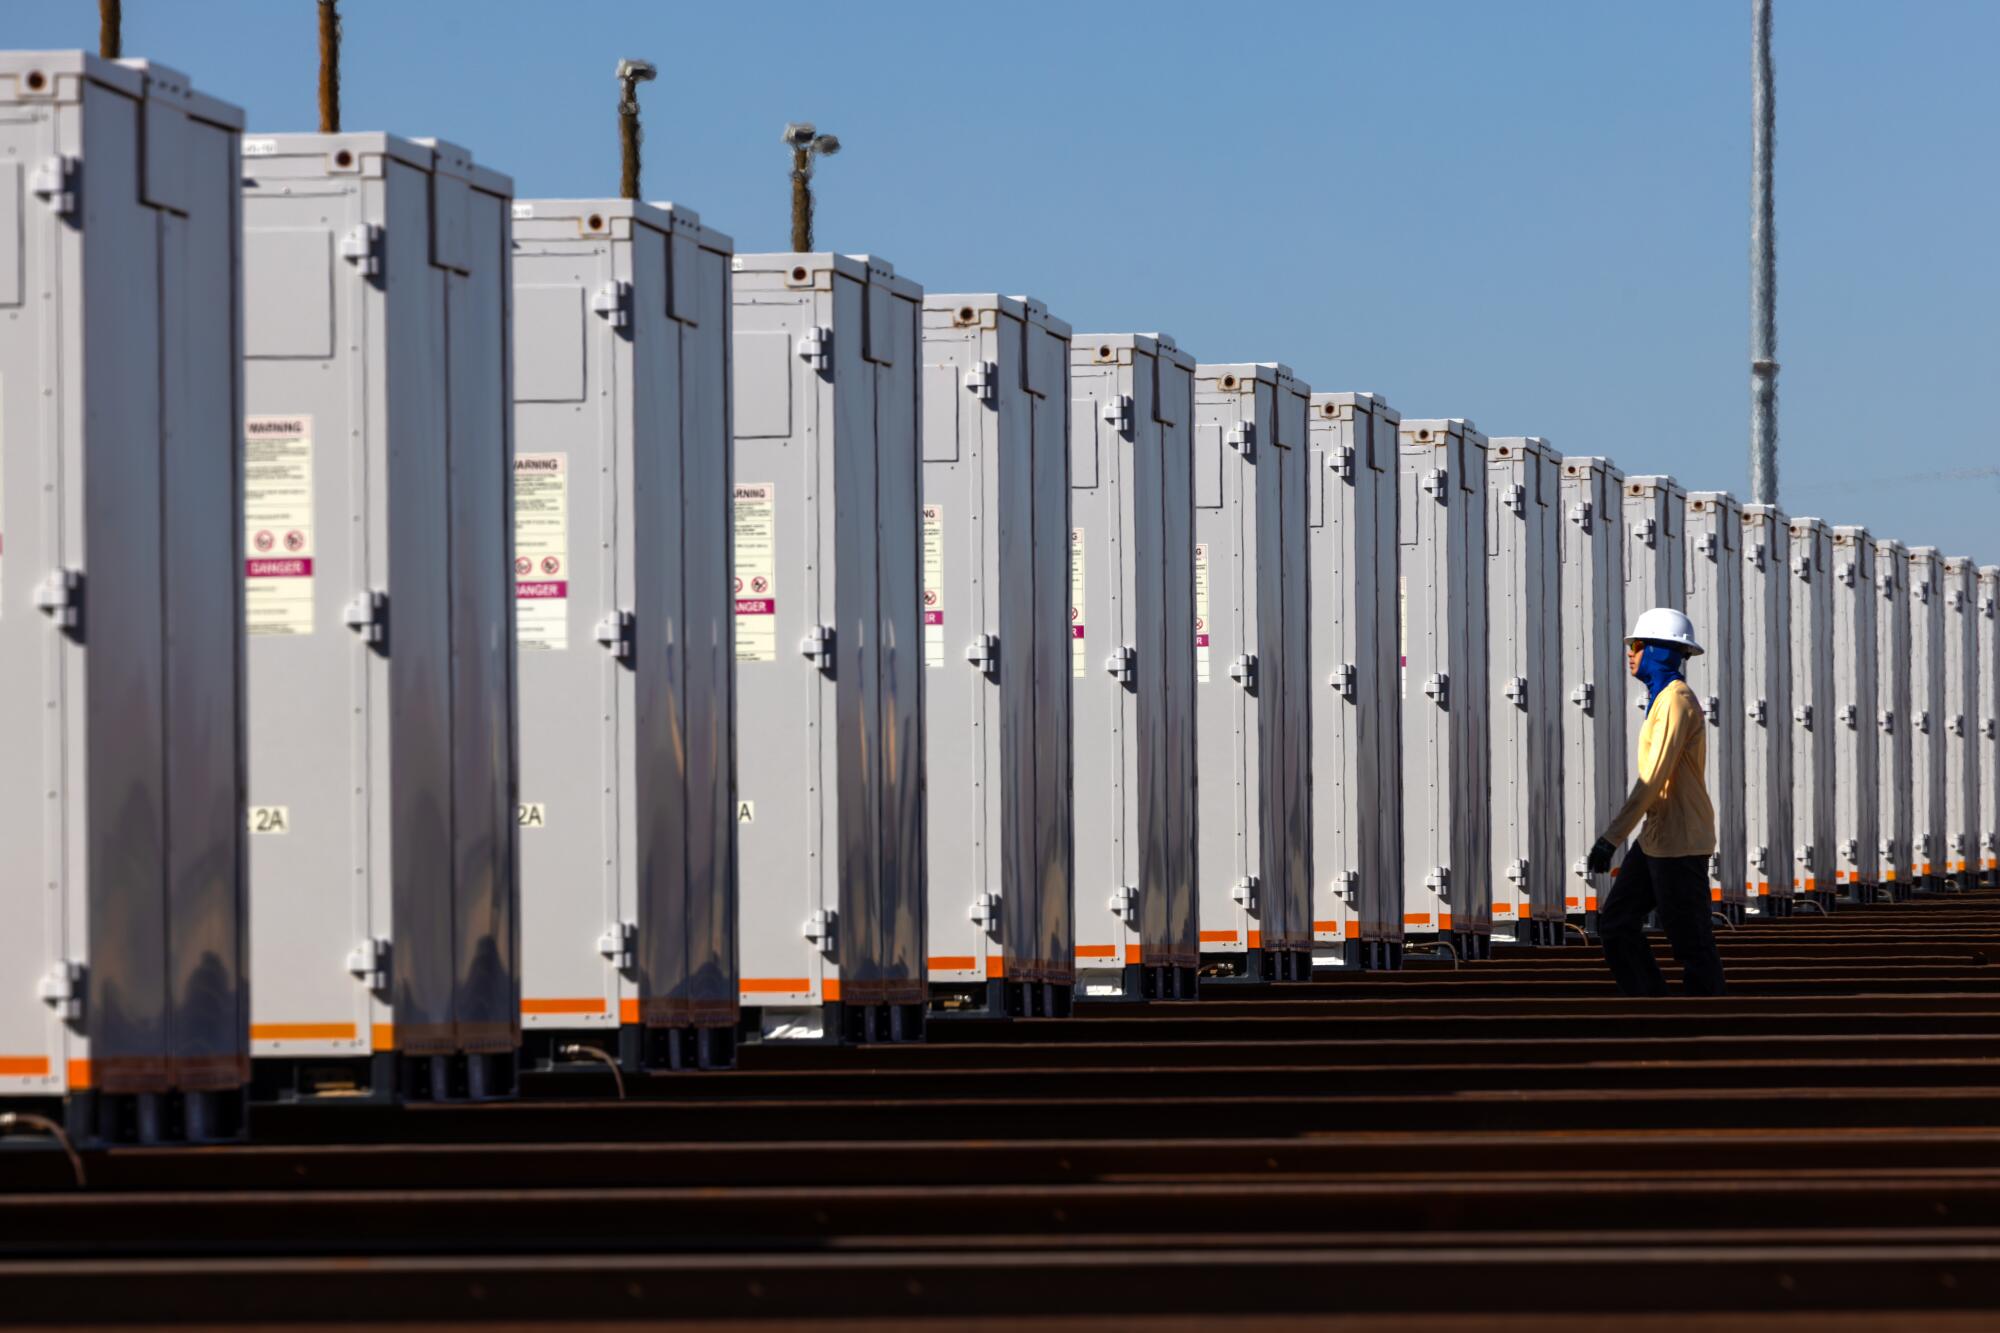 A worker in a hardhat inspects a row of large storage batteries.